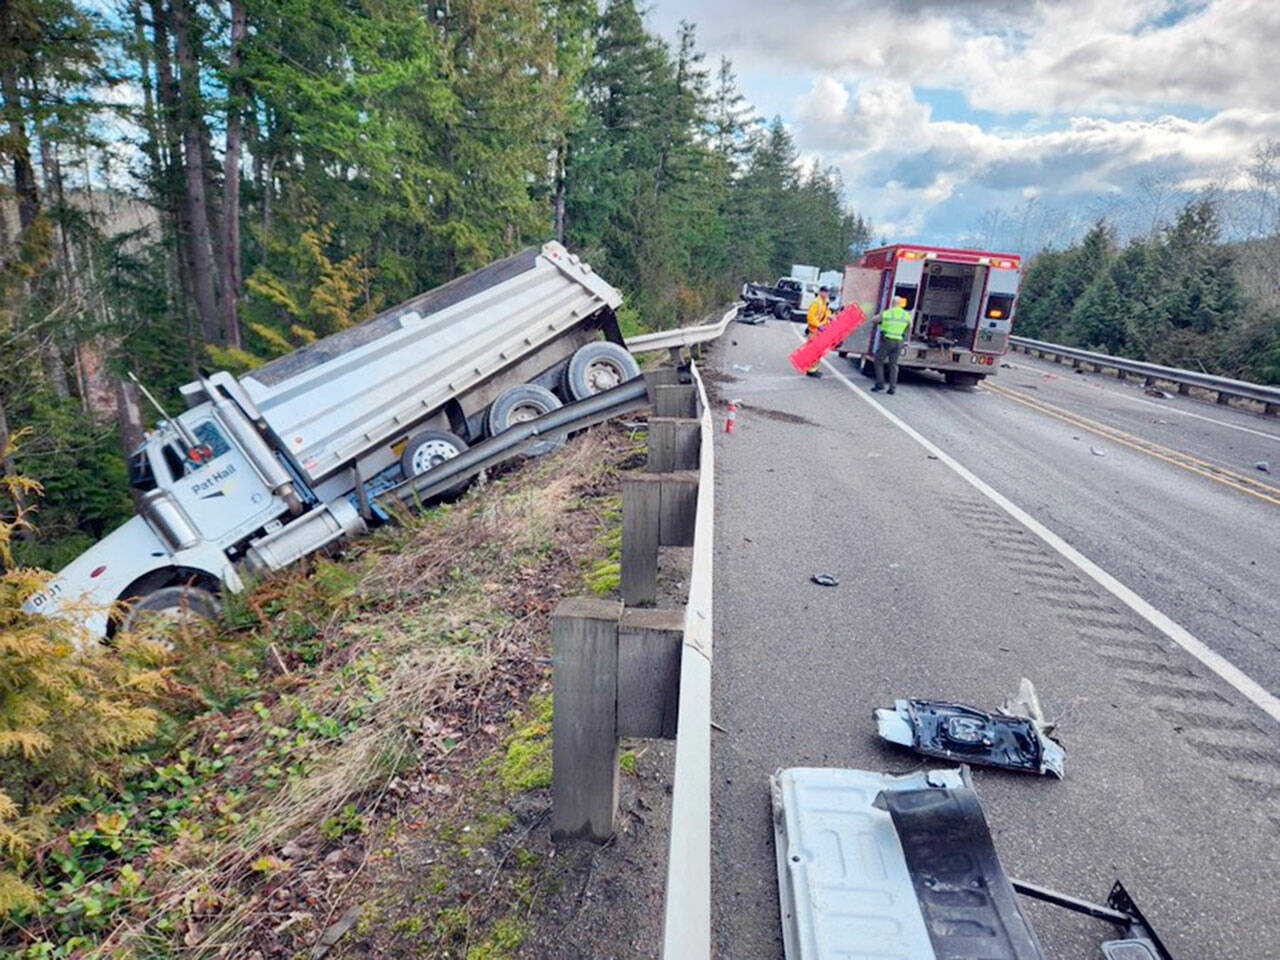 A dump truck was sent over the embankment on state Highway 104 near state Highway 19 when two pickups were involved in a glancing head-on collision shortly before 11 a.m. Friday. (Jefferson County Sheriff’s Office)